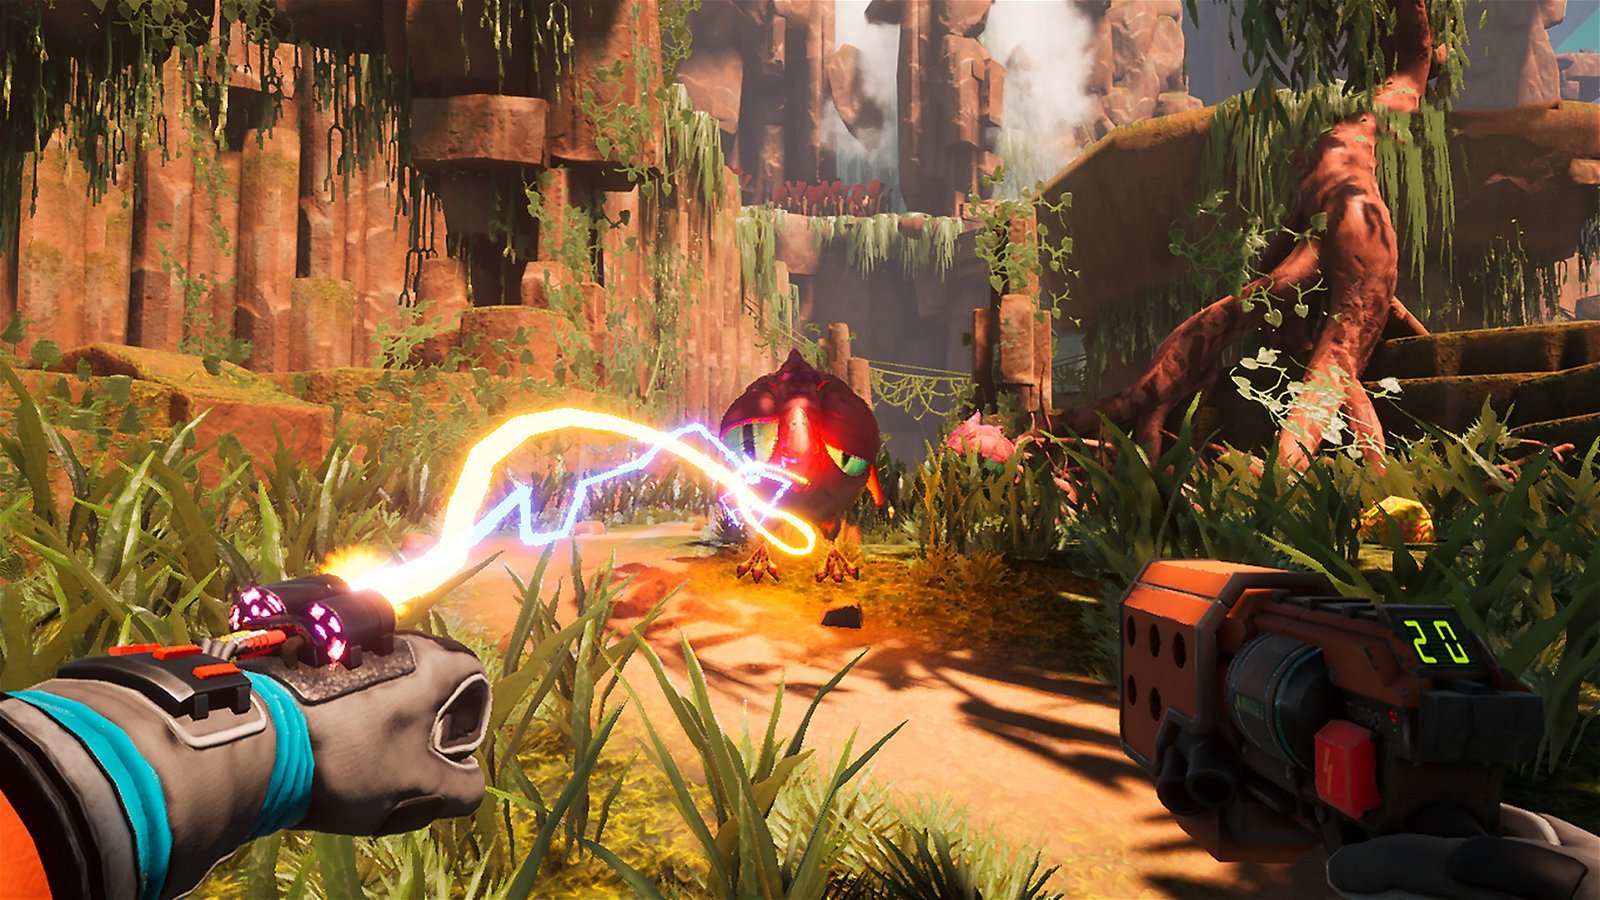 Journey to the Savage Planet, typhoon studios,505 games , ps4, playstation 4, asia, release date, gameplay, features,multi-language price, pre-order now, trailer